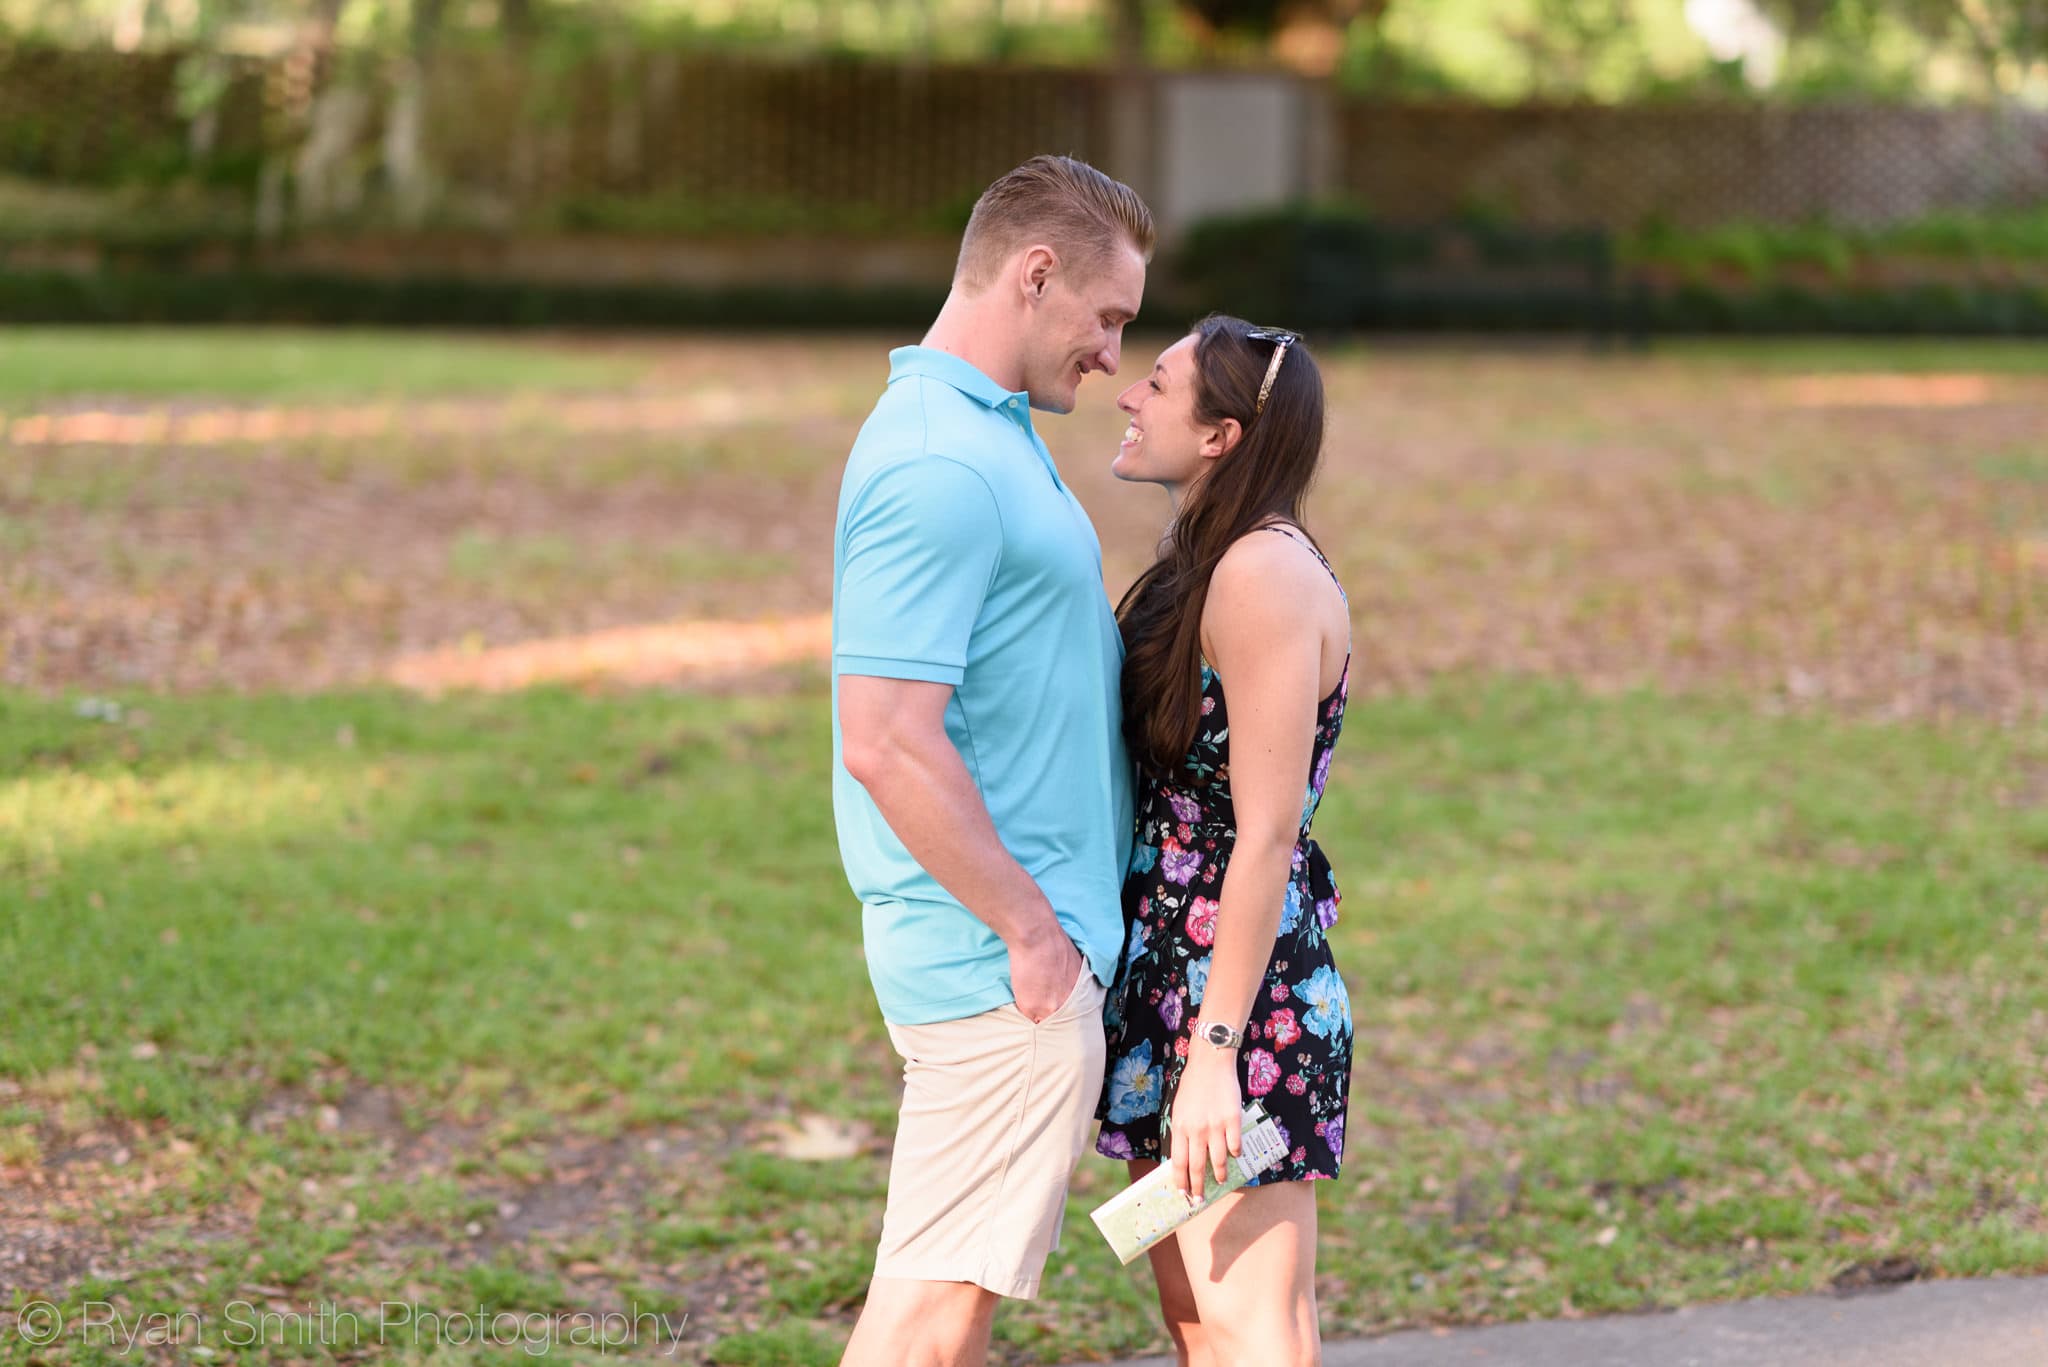 Man about to propose to girlfriend - Brookgreen Gardens